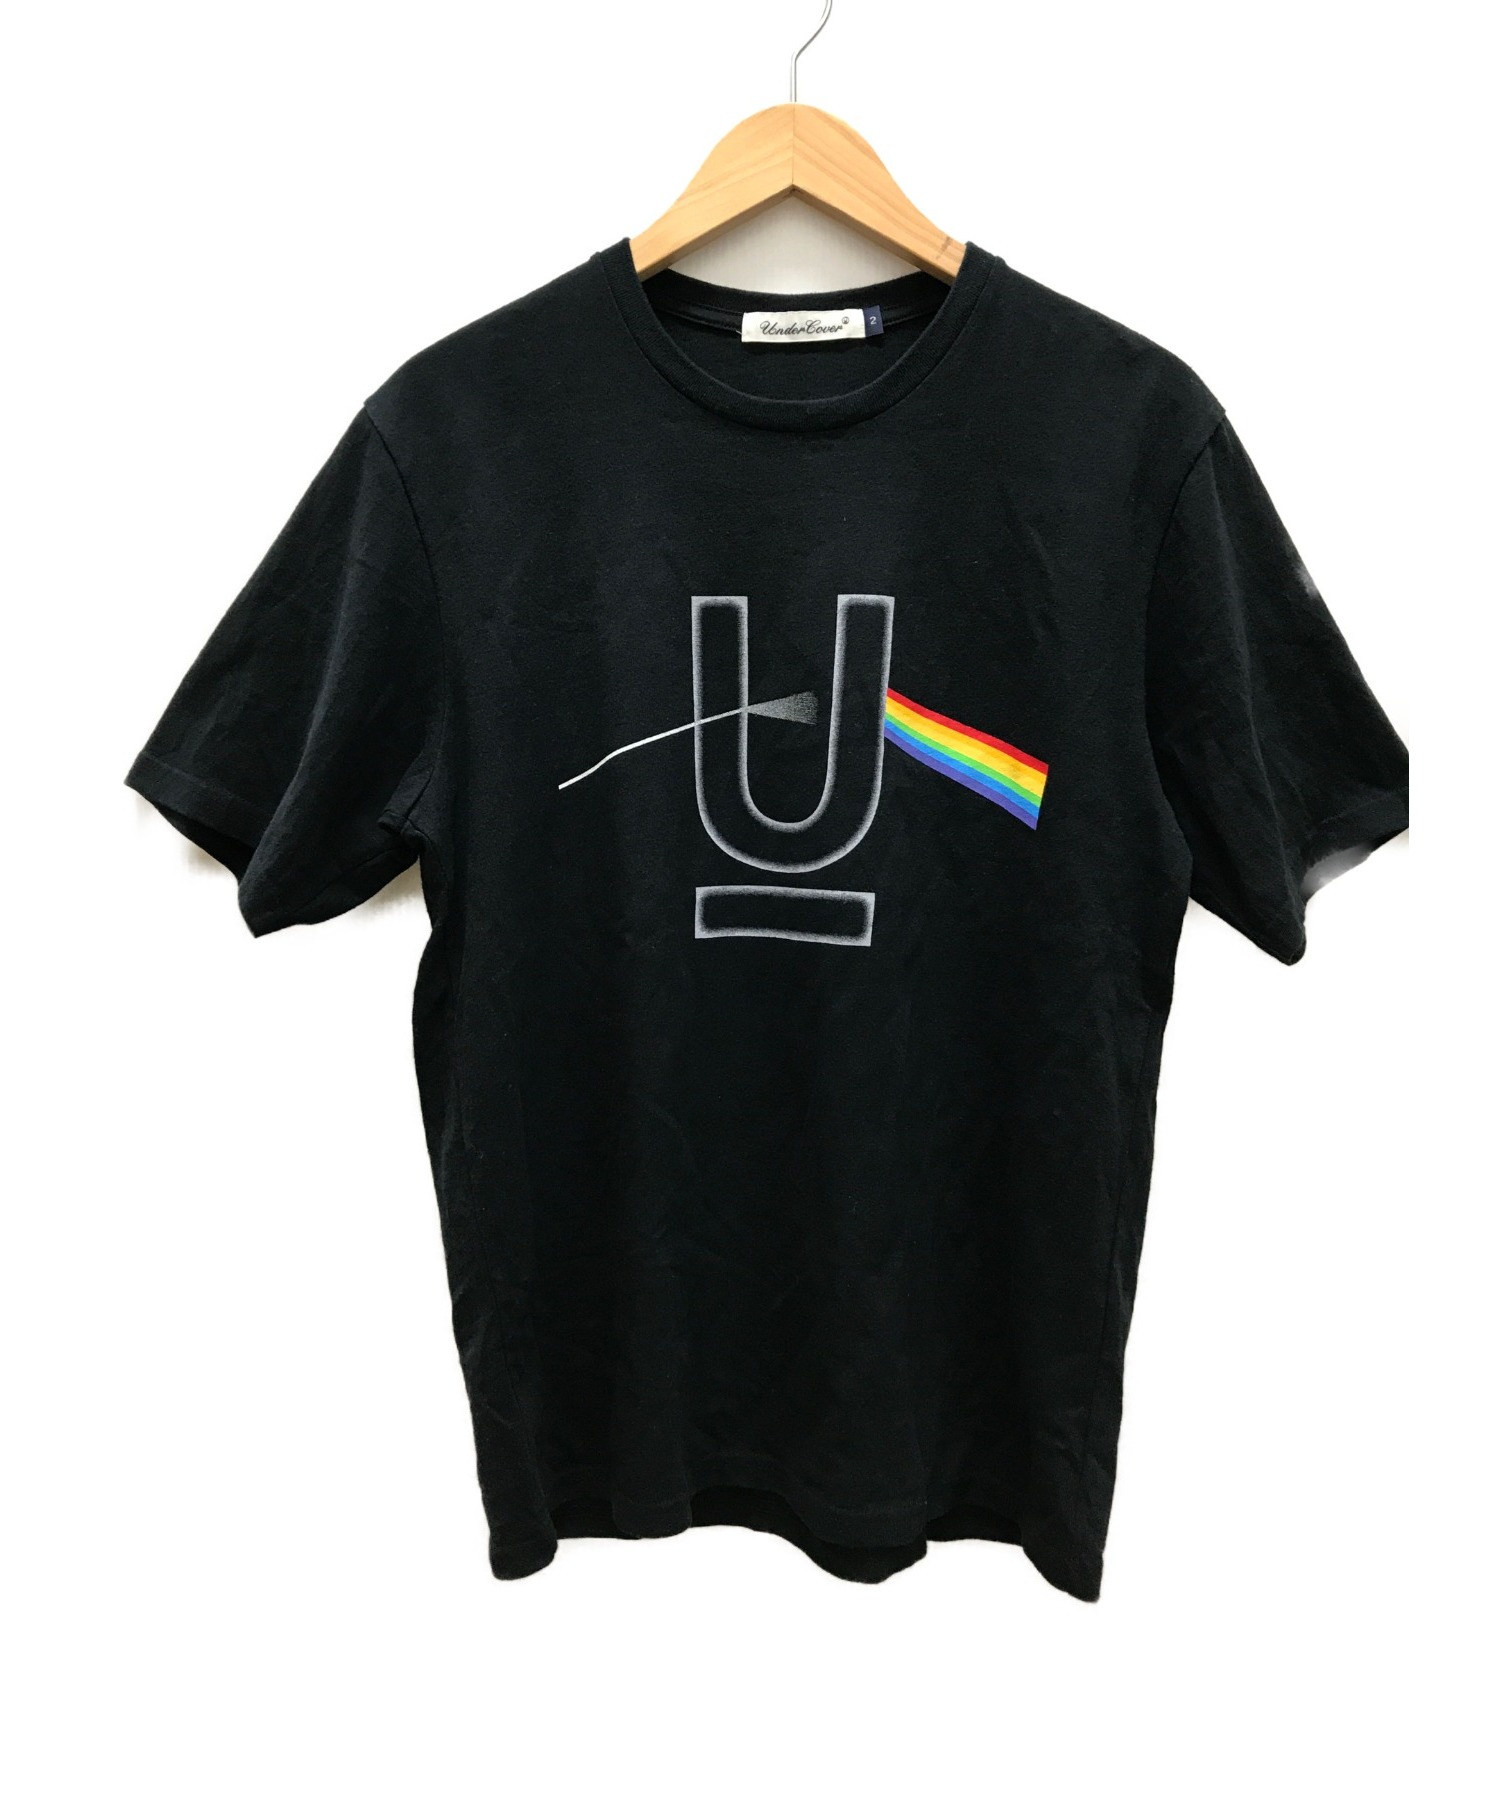 SALE／60%OFF】 Tシャツ/カットソー(半袖/袖なし) UNDERCOVER Tシャツ ...